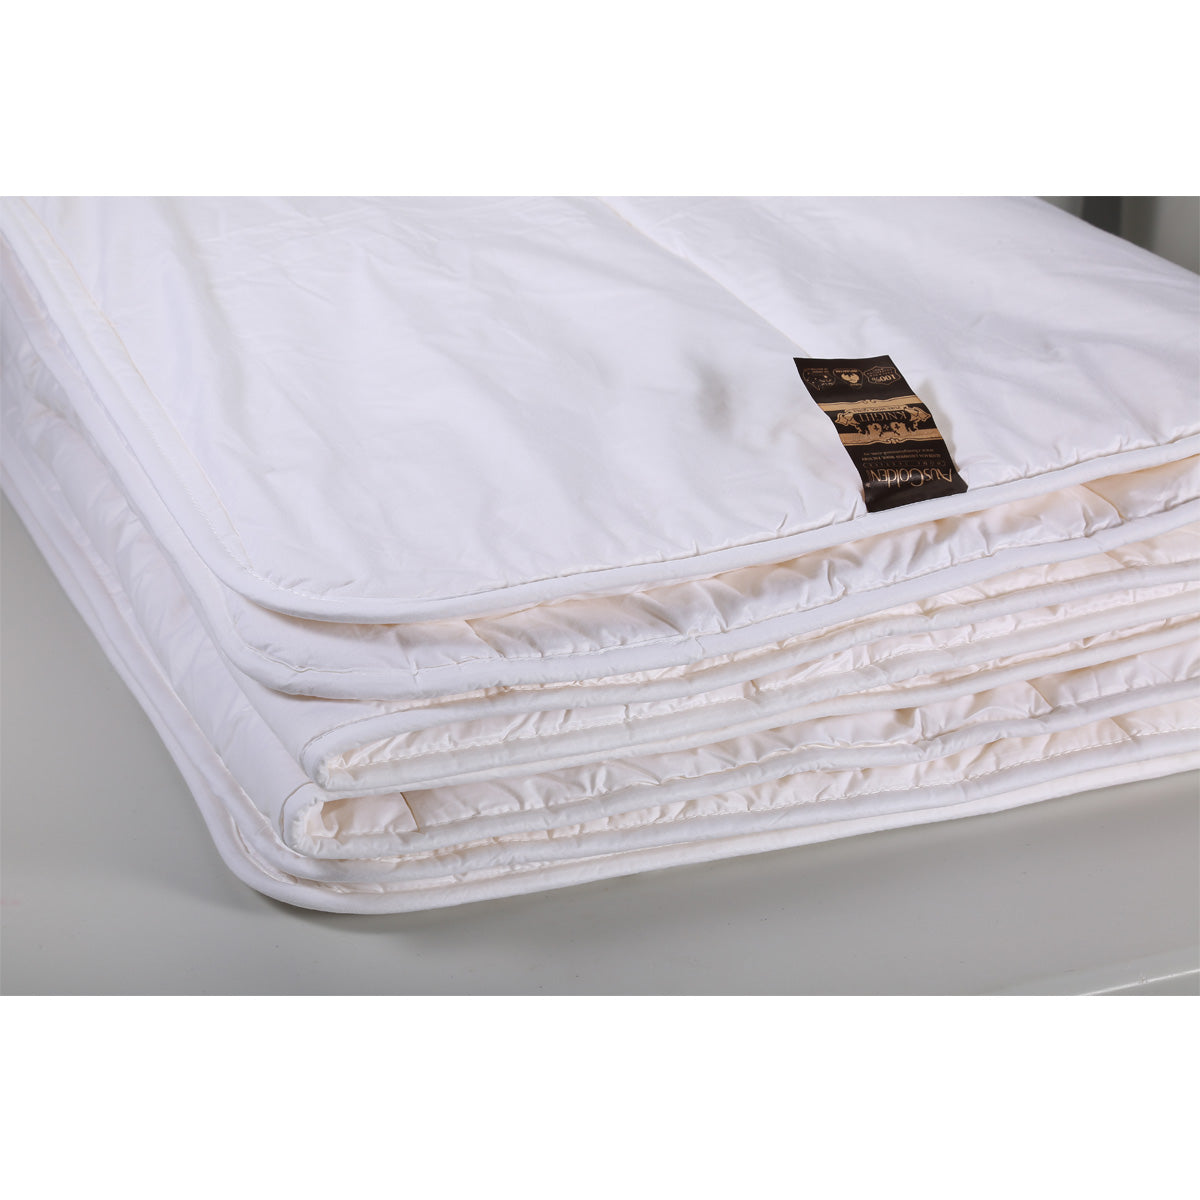 All-Season Washable Soft Cotton Bedding Comforter Quilt - Woolhome